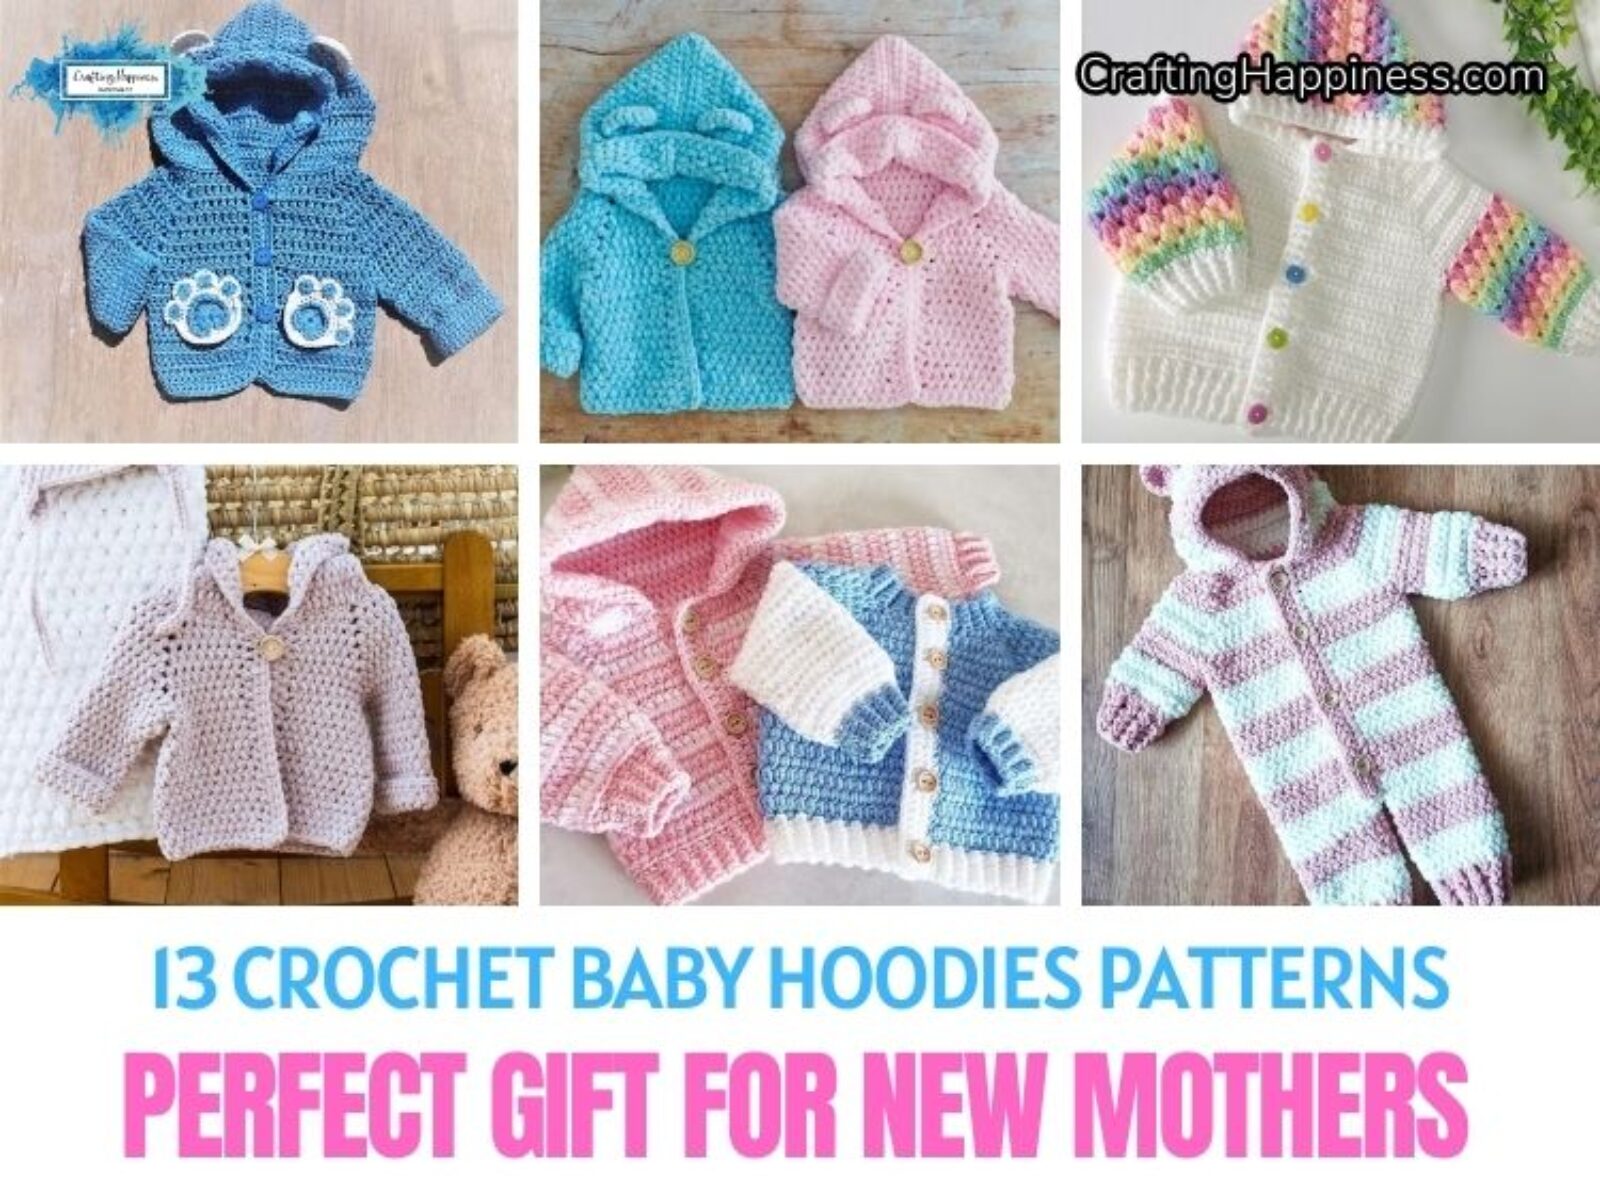 FB POSTER - 13 Crochet Baby Hoodies Patterns - Perfect Gift For New Mothers - Crafting Happiness